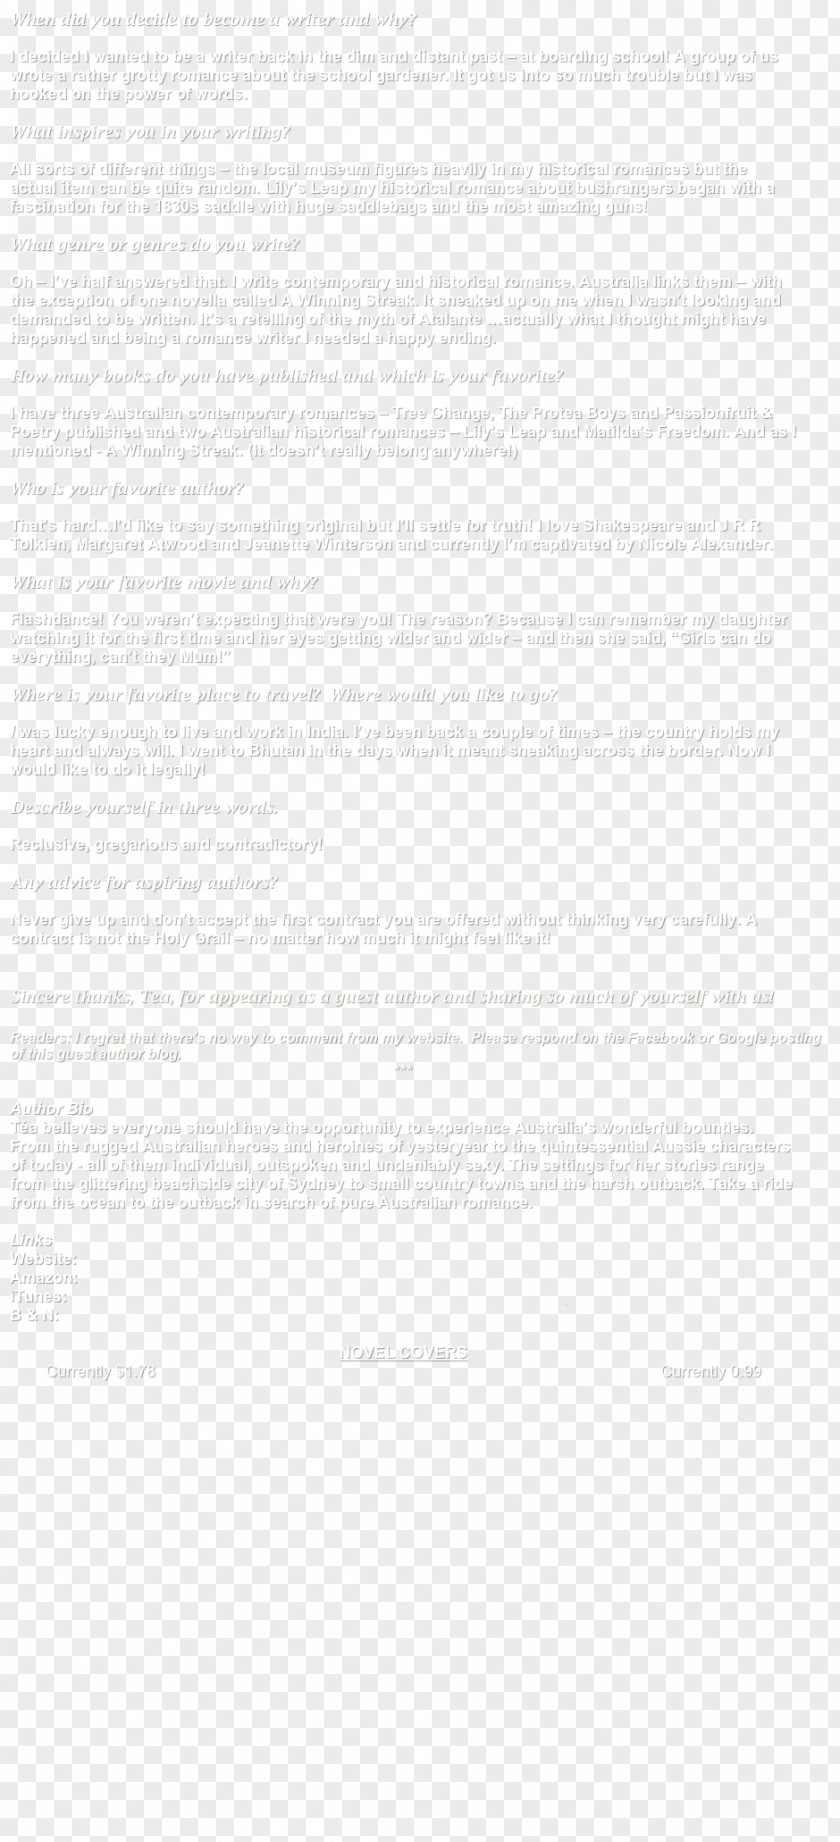 Macbeth Character Bio Poem Document Product Design Discovery Of Achilles On Skyros PNG